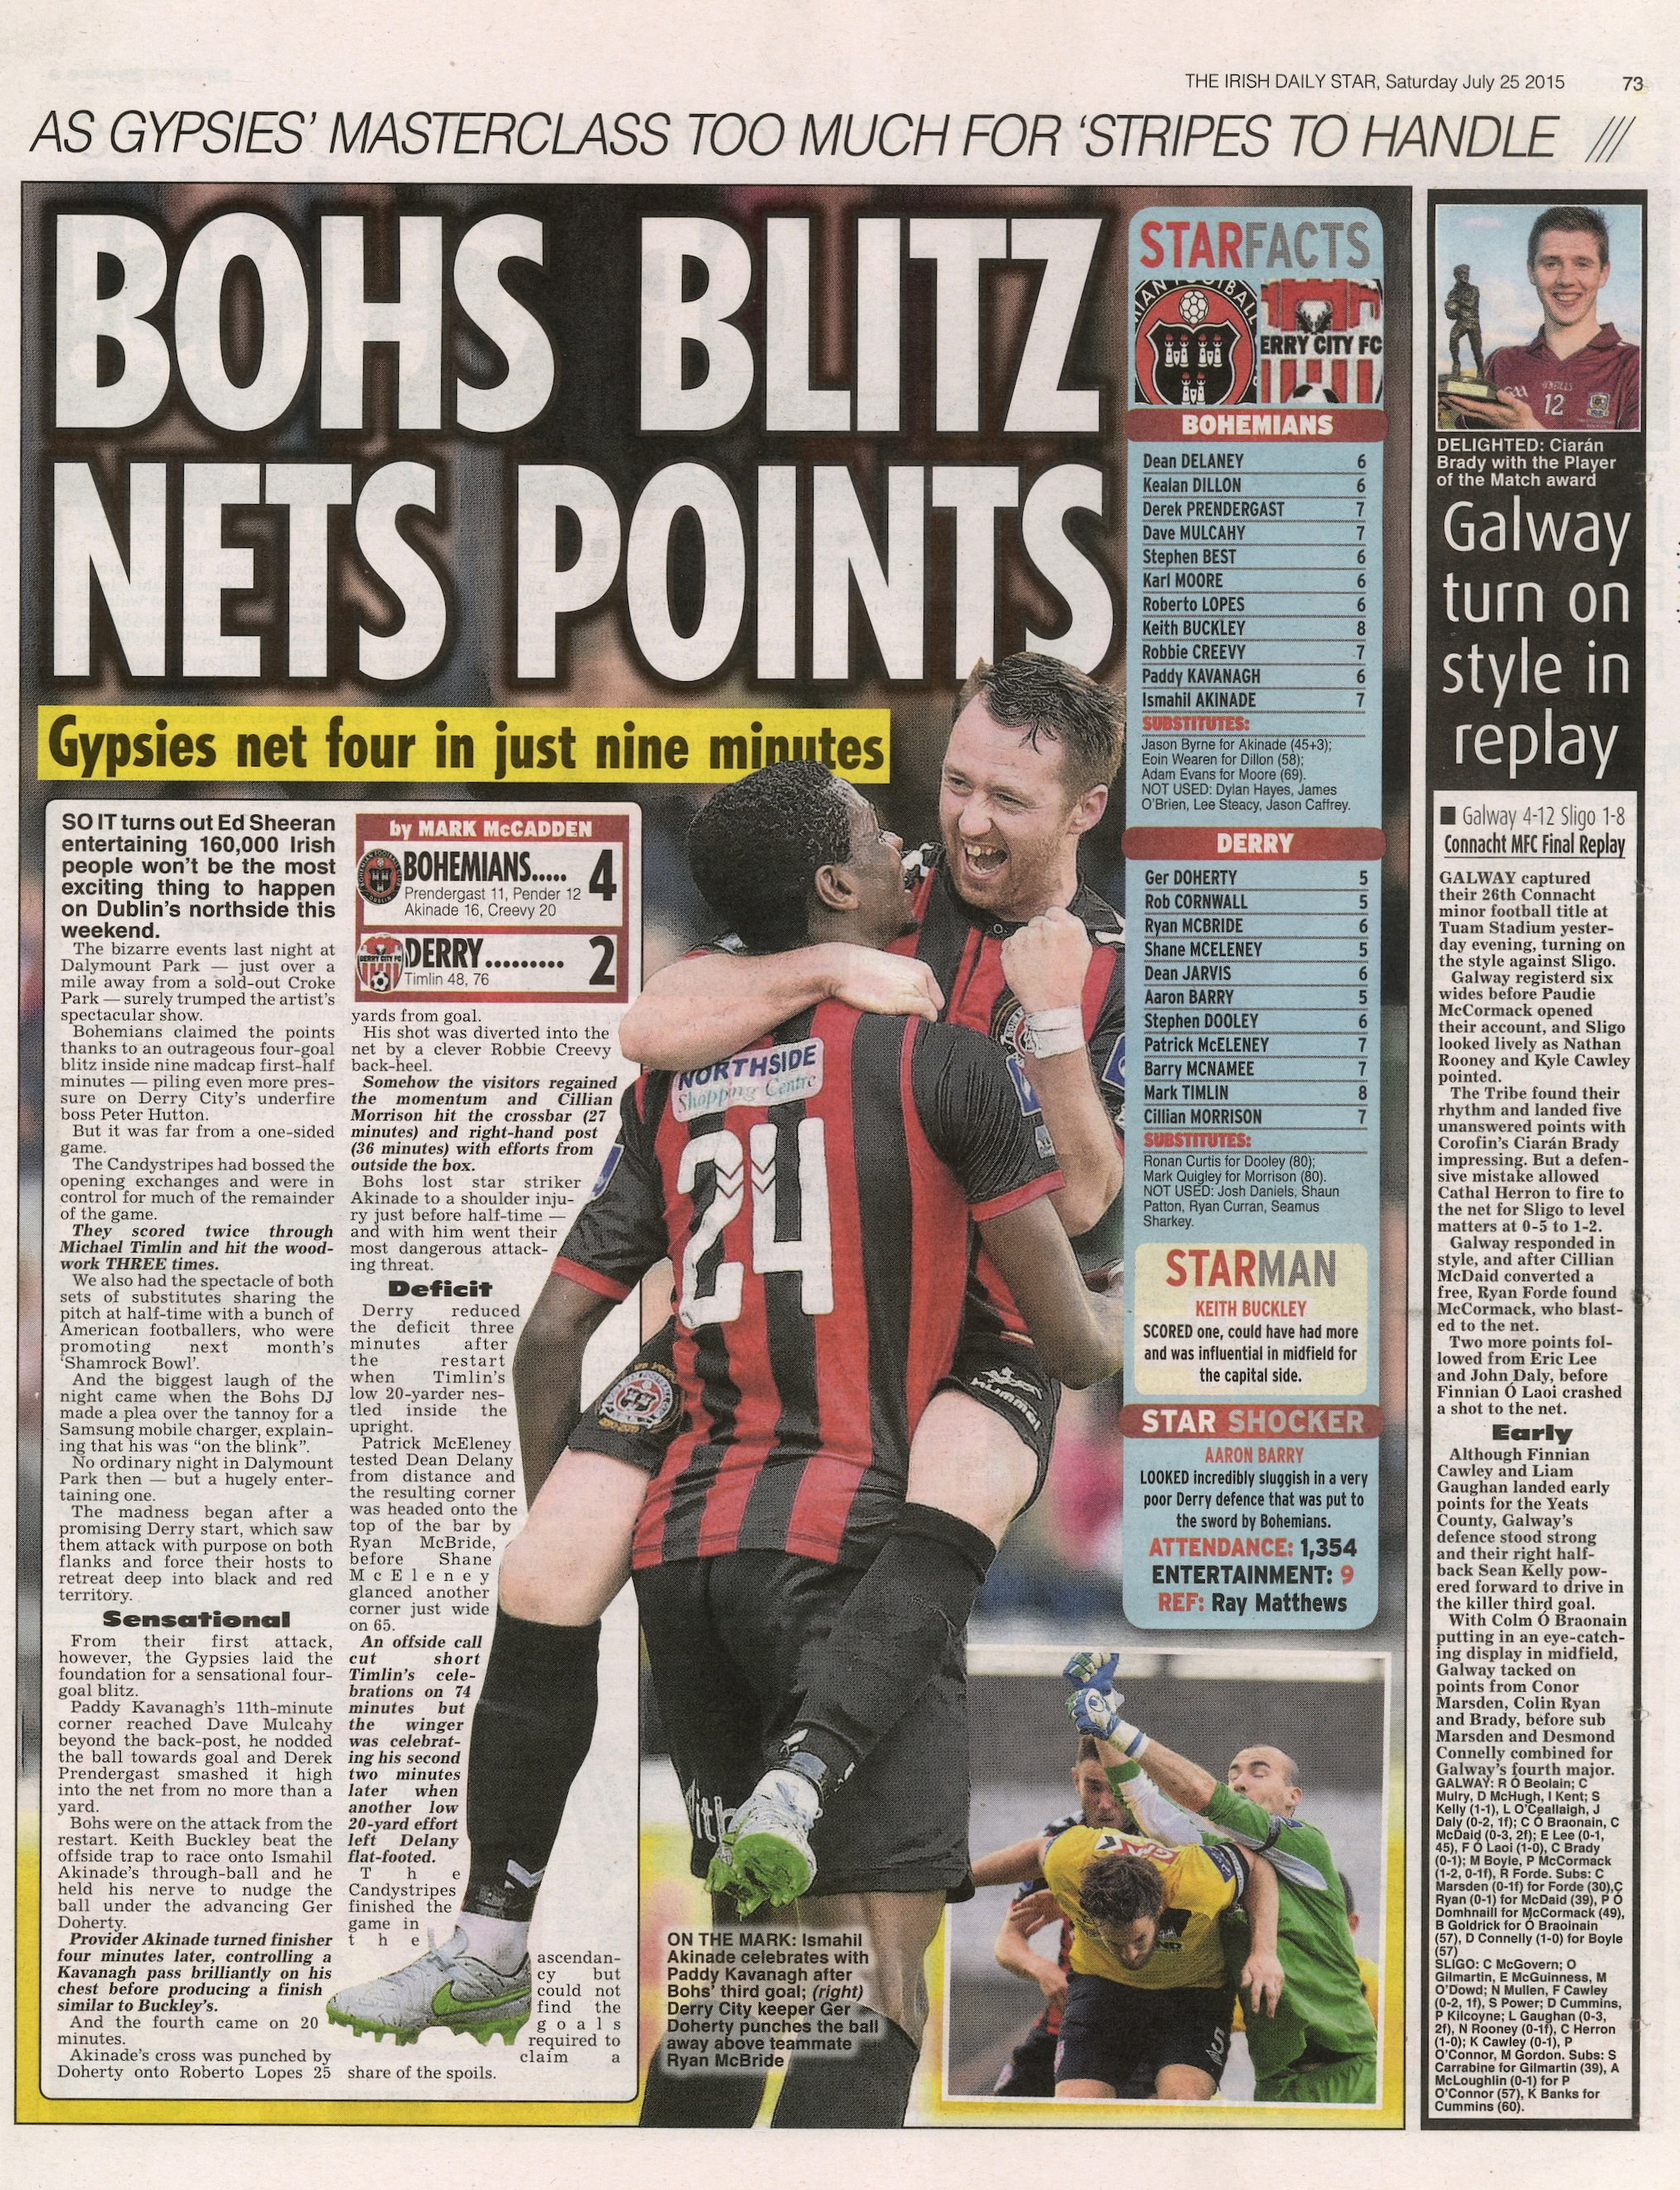  Ismahil Akinade of Bohemians celebrates with team-mate Paddy Kavanagh after scoring his side's first goal against Derry July 26 2015  Irish Daily Star  